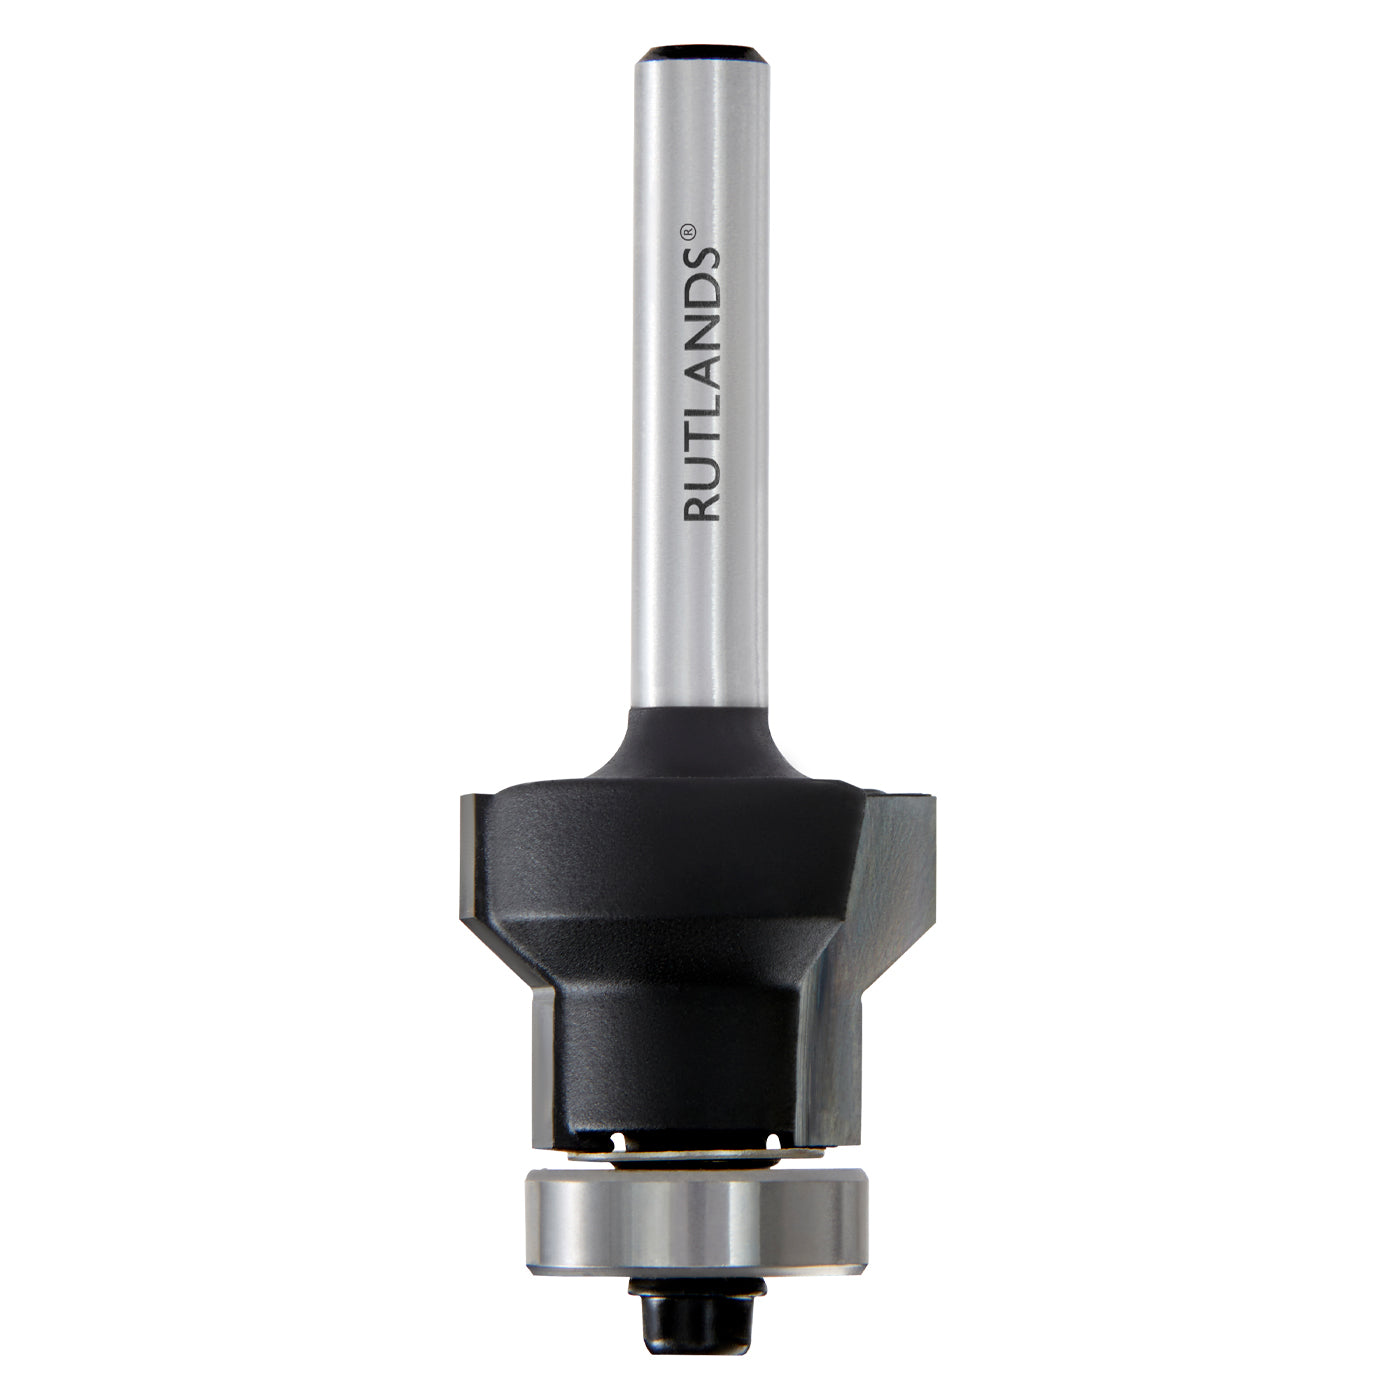 Router Bit - Combination Flush & Bevel Trim with Bearing - D=22mm H=16mm A=45° L=61mm S=1/4"